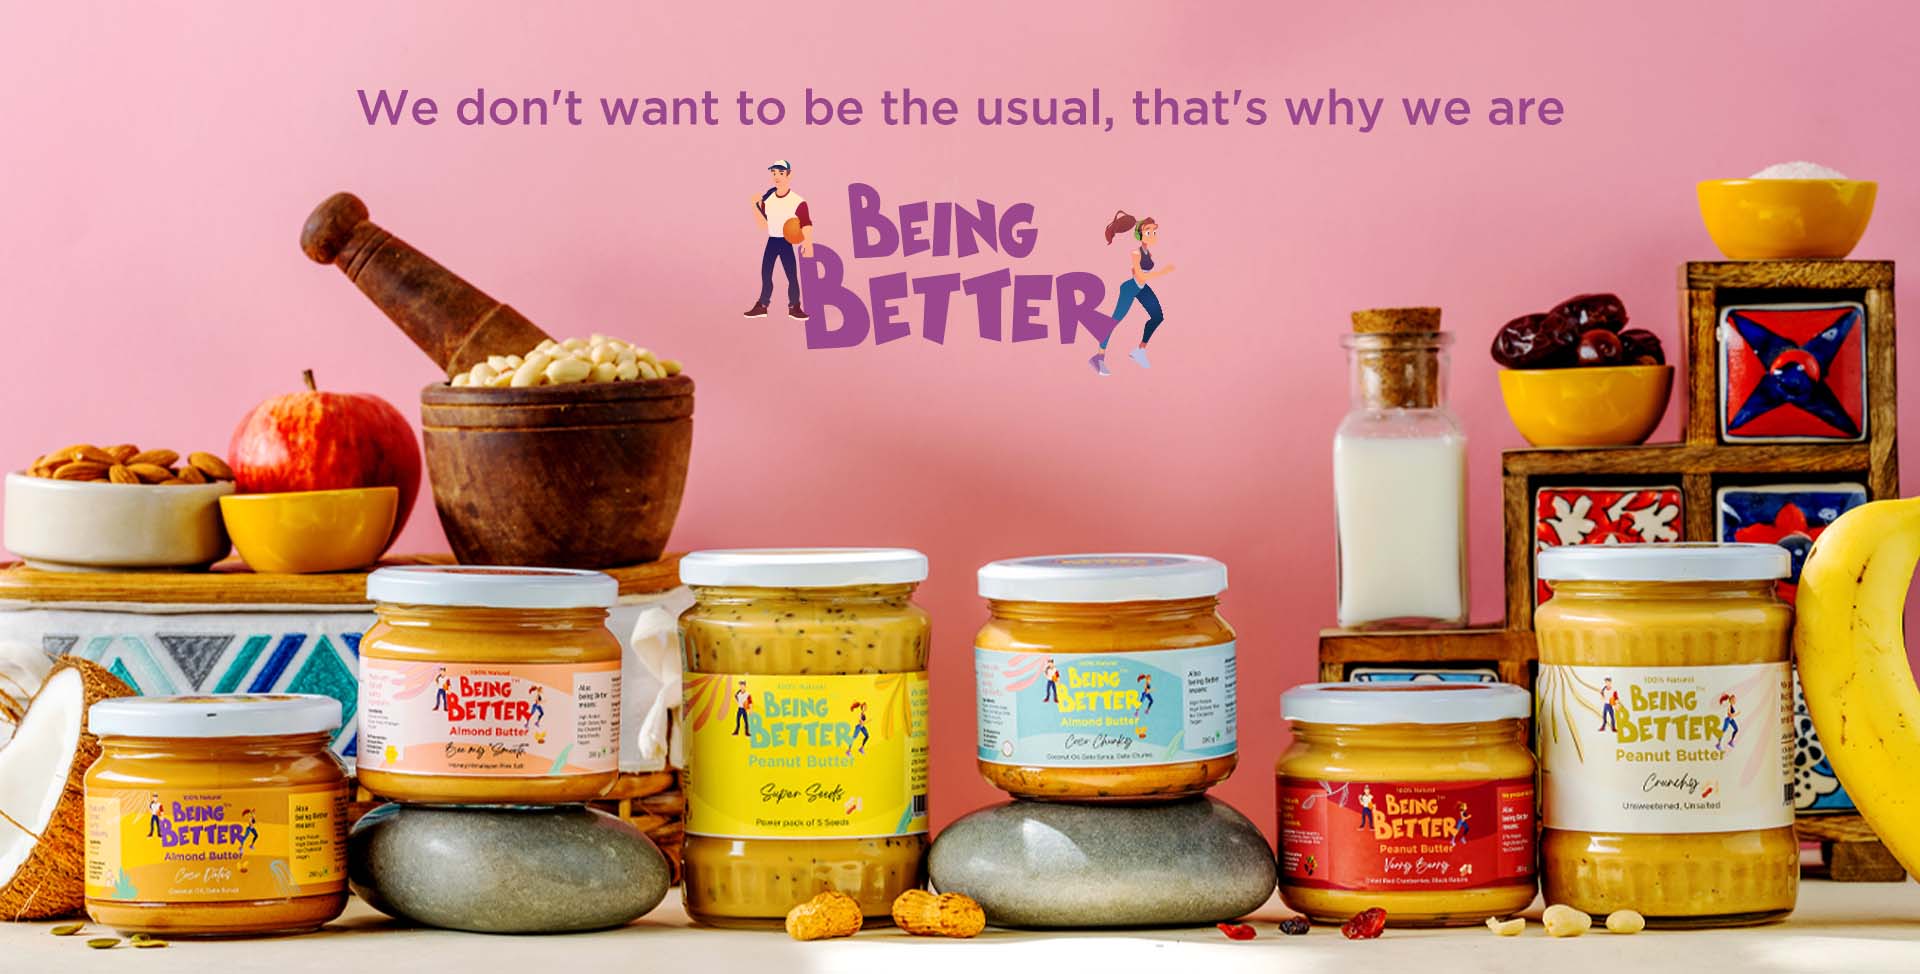 Range of Peanut Butter,Almond Butter and Chocolate Spread offered by Being Better